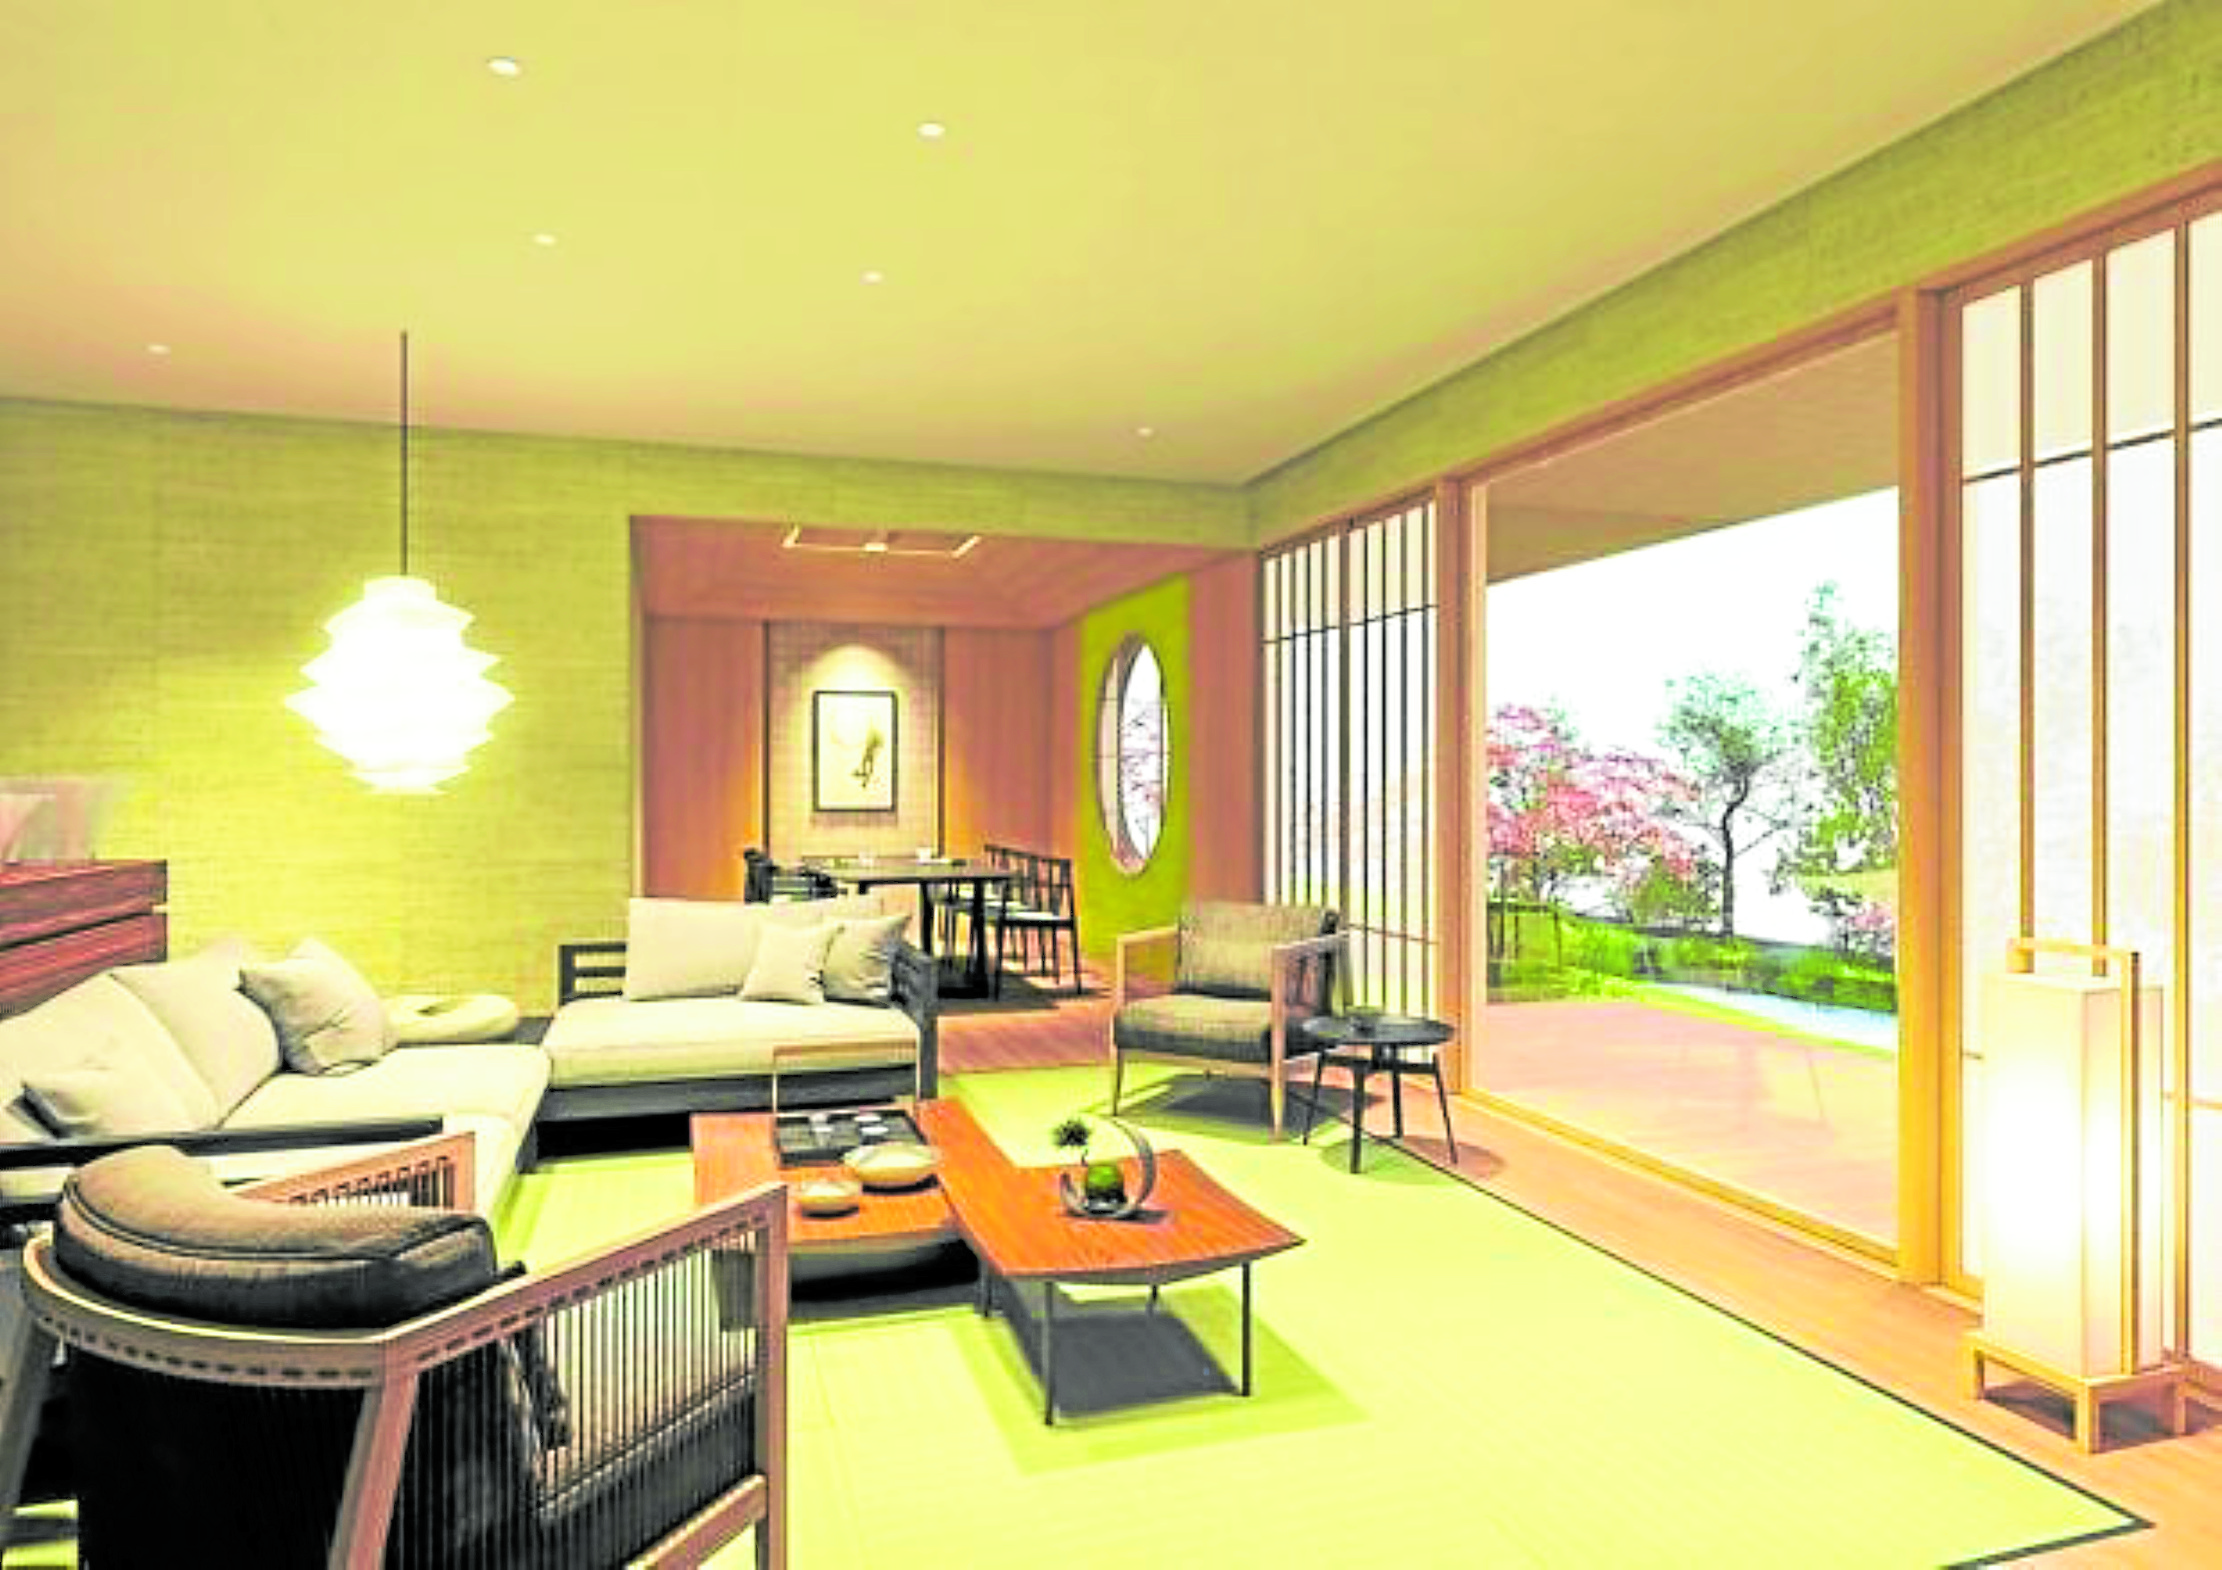 Zen principles infusePhilippine real
estate with
a sense of
simplicity and
tranquility.